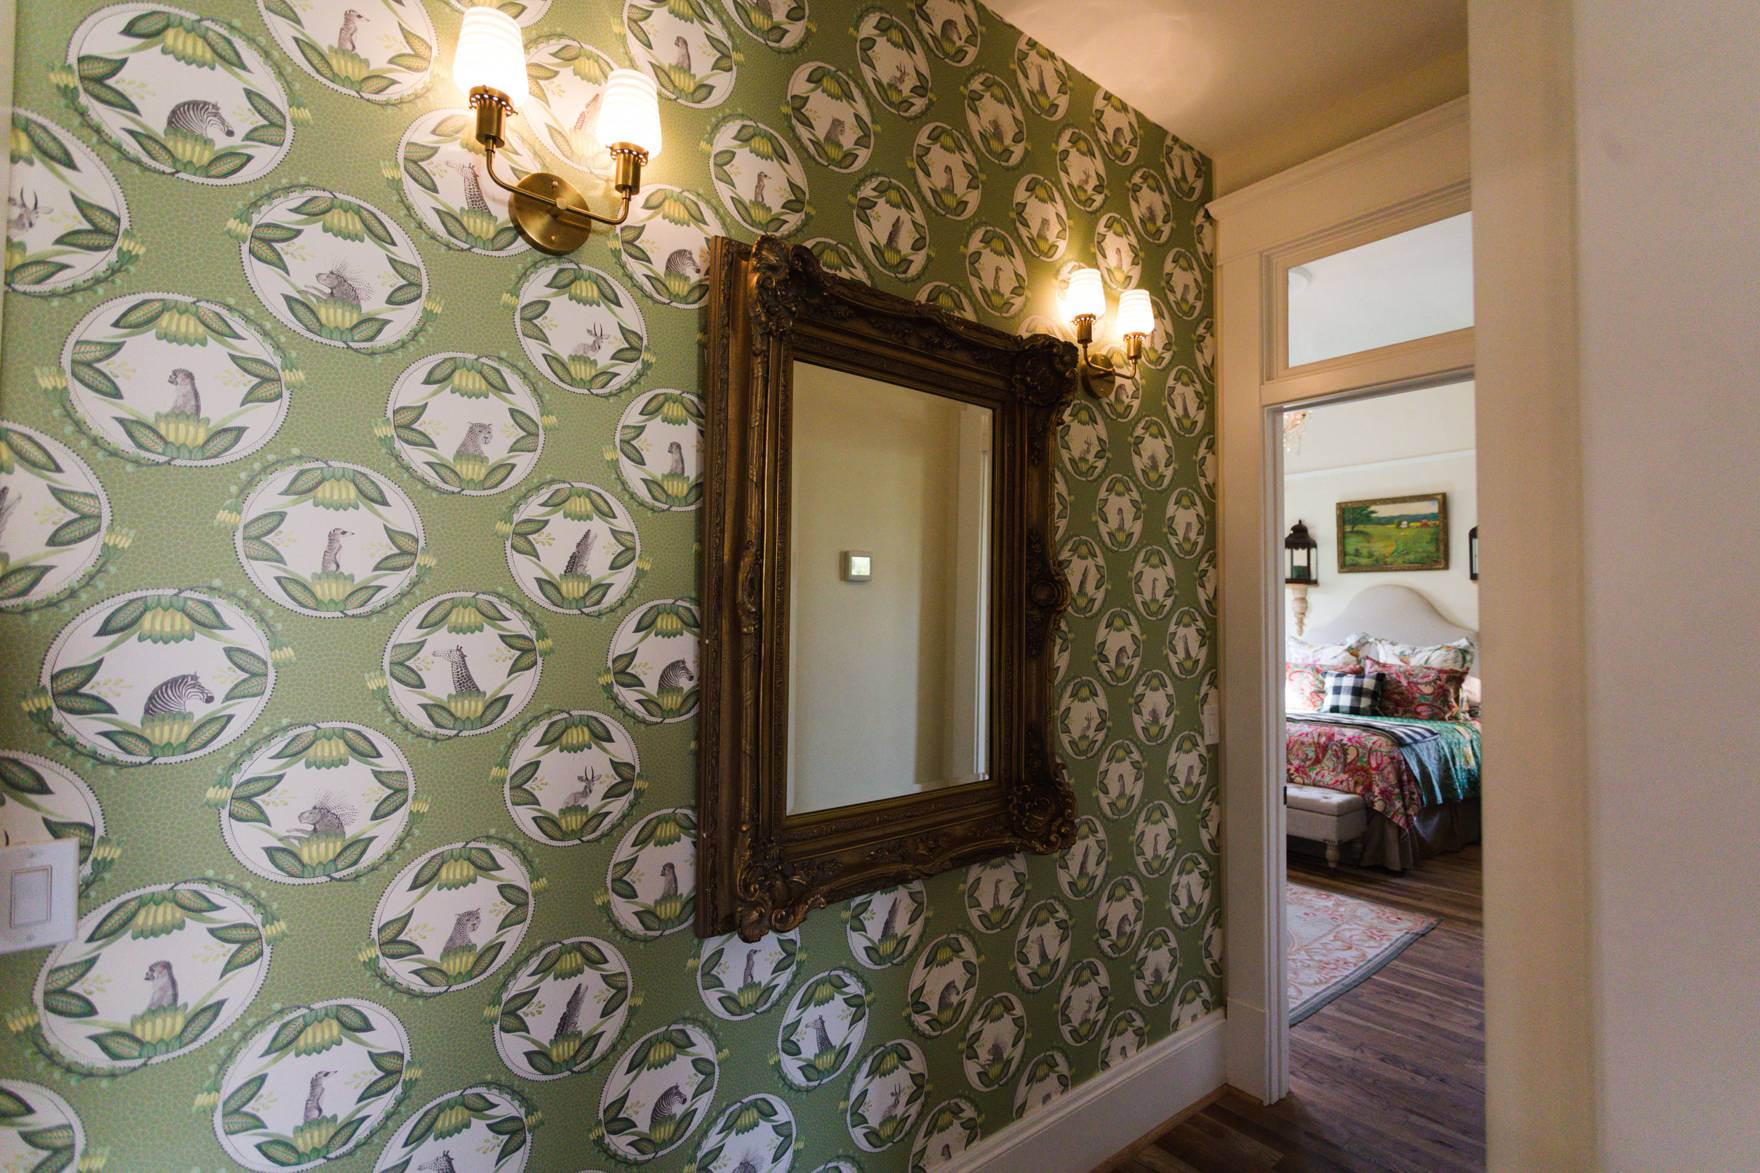 Home Tour of Boho Farm and Home in Downtown Phoenix - cottage brick style home from 1903 hallway wallpaper creature cameo wallpaper anthropologie